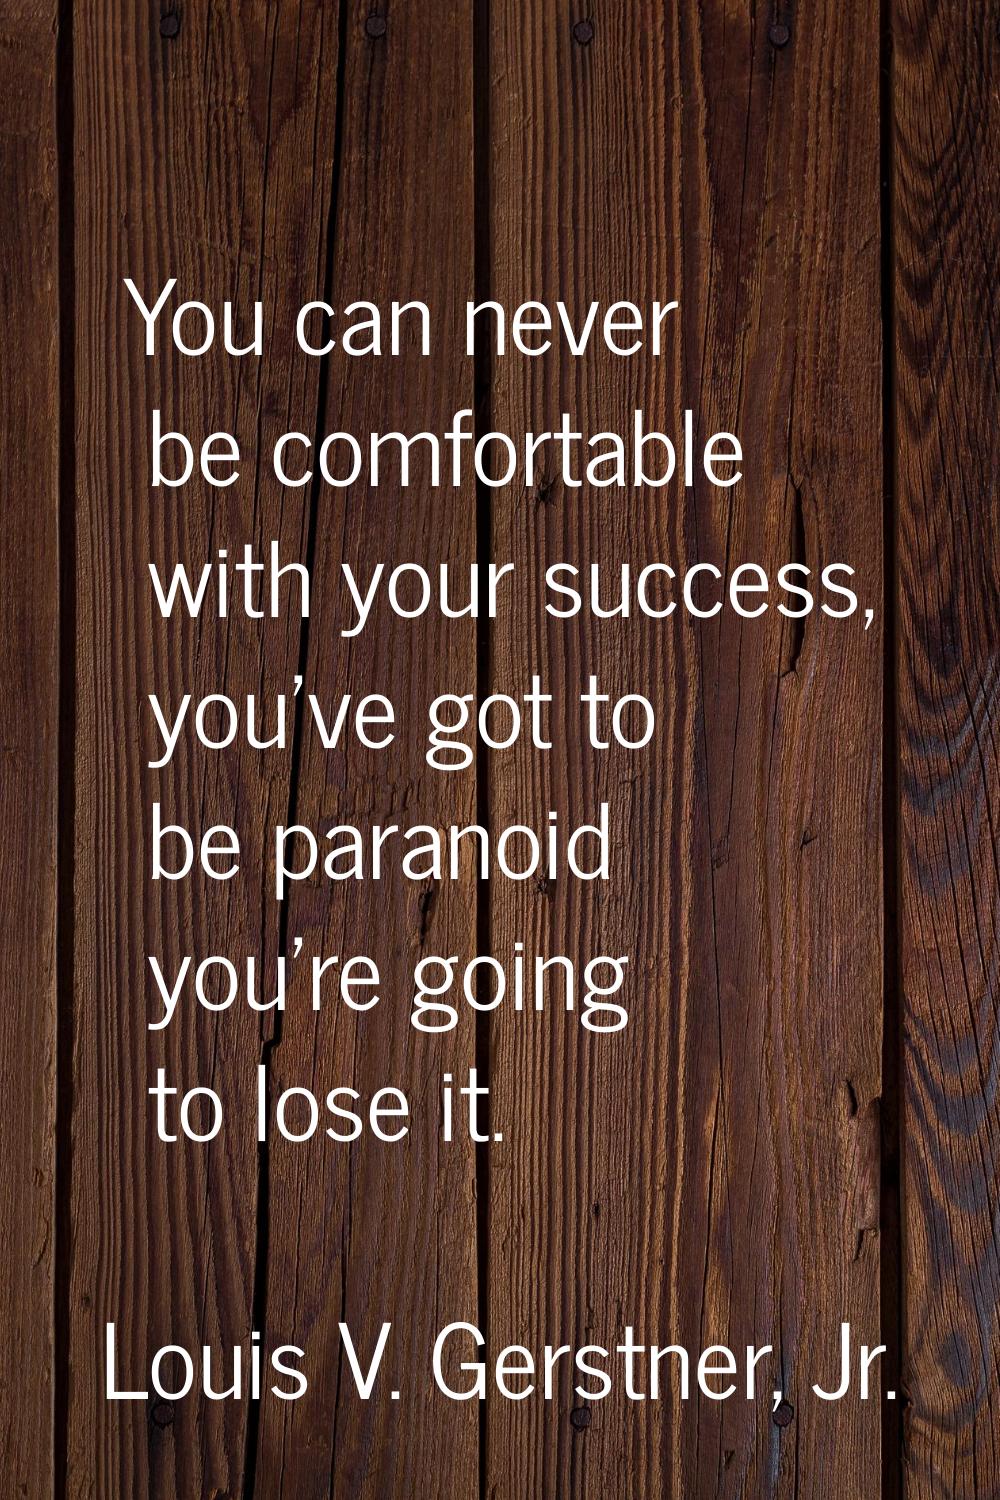 You can never be comfortable with your success, you've got to be paranoid you're going to lose it.